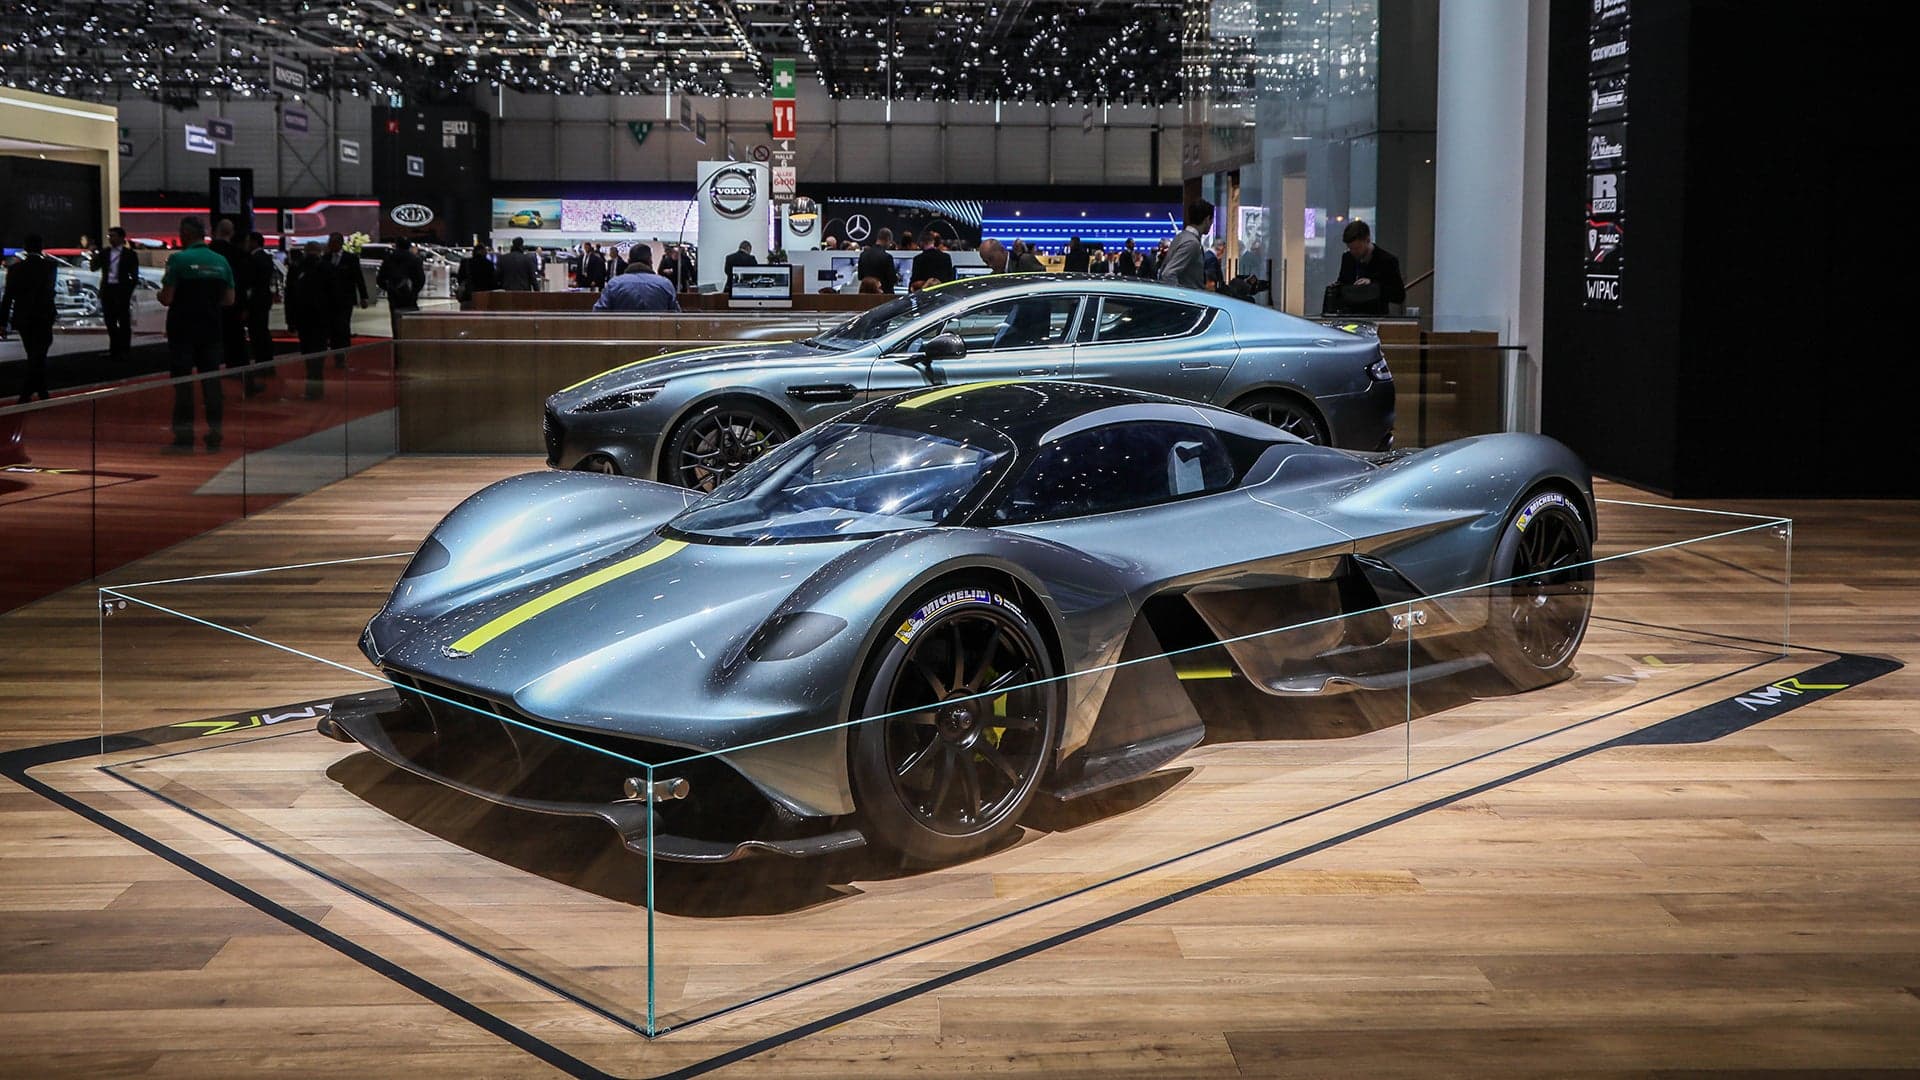 Cosworth Confirms Aston Martin Valkyrie Will Have World’s Most Powerful Naturally-Aspirated Engine